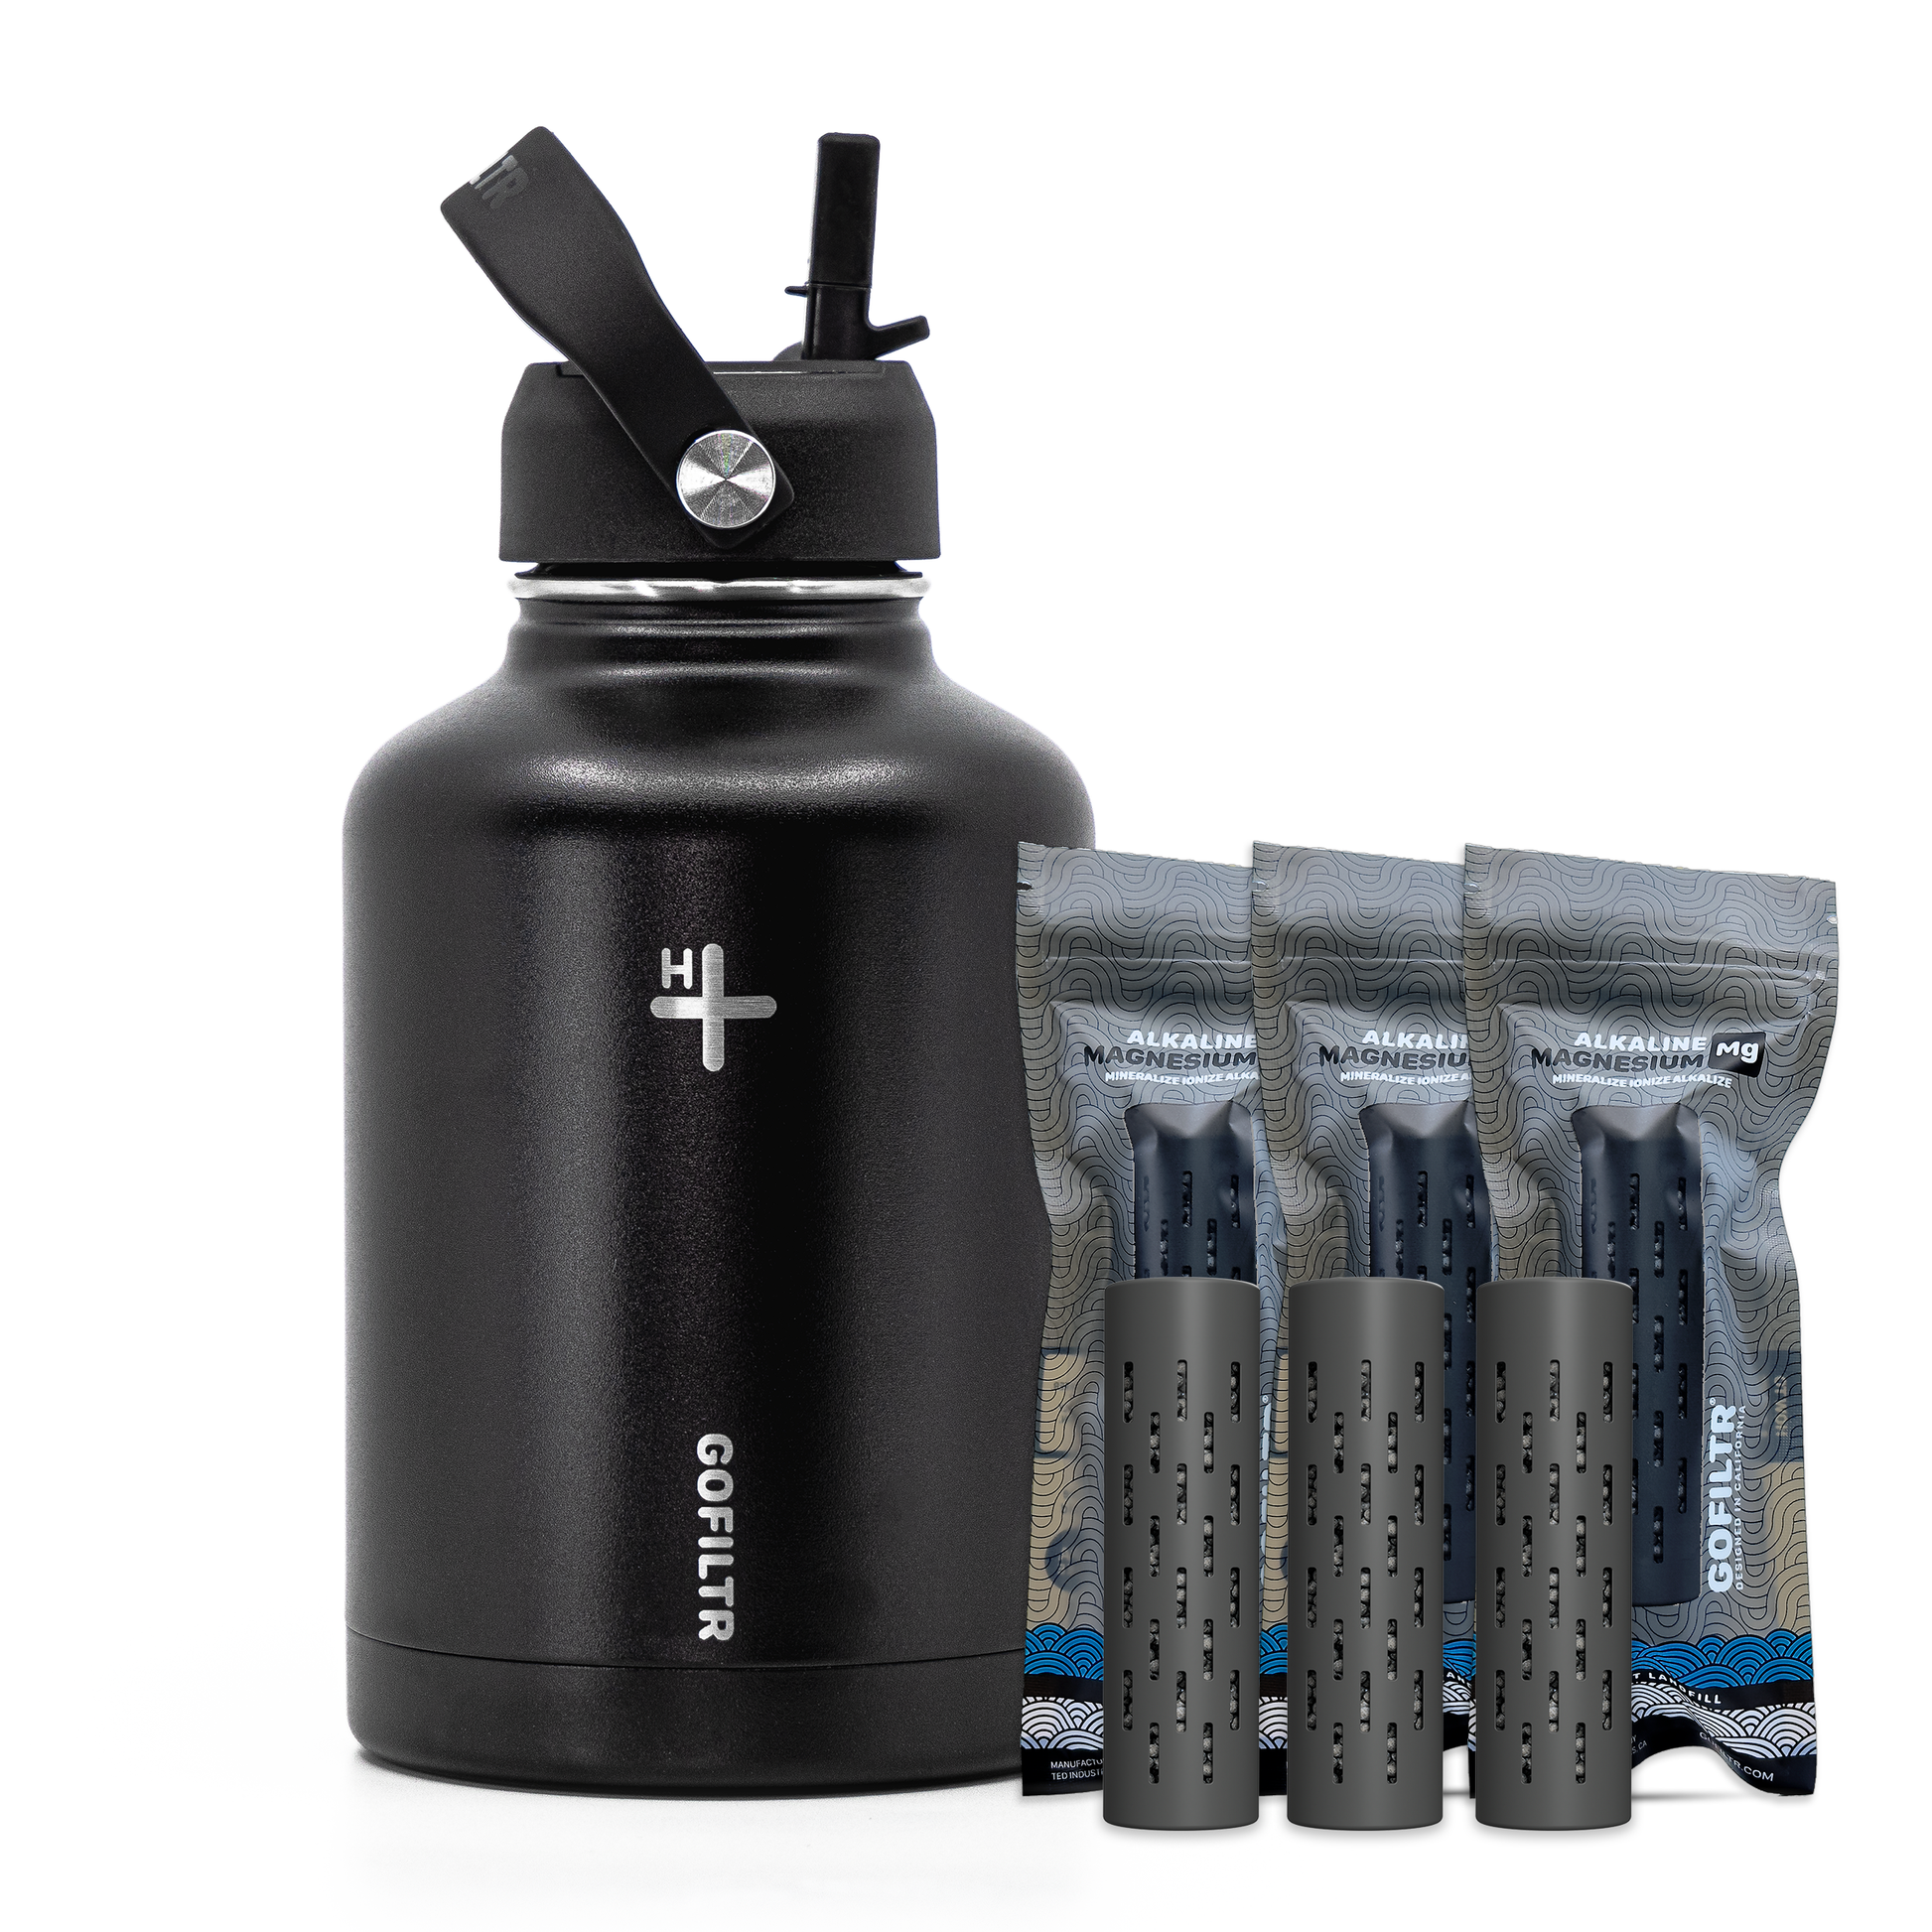 Invigorated Water pH ACTIVE Insulated Water Bottle - Filtered